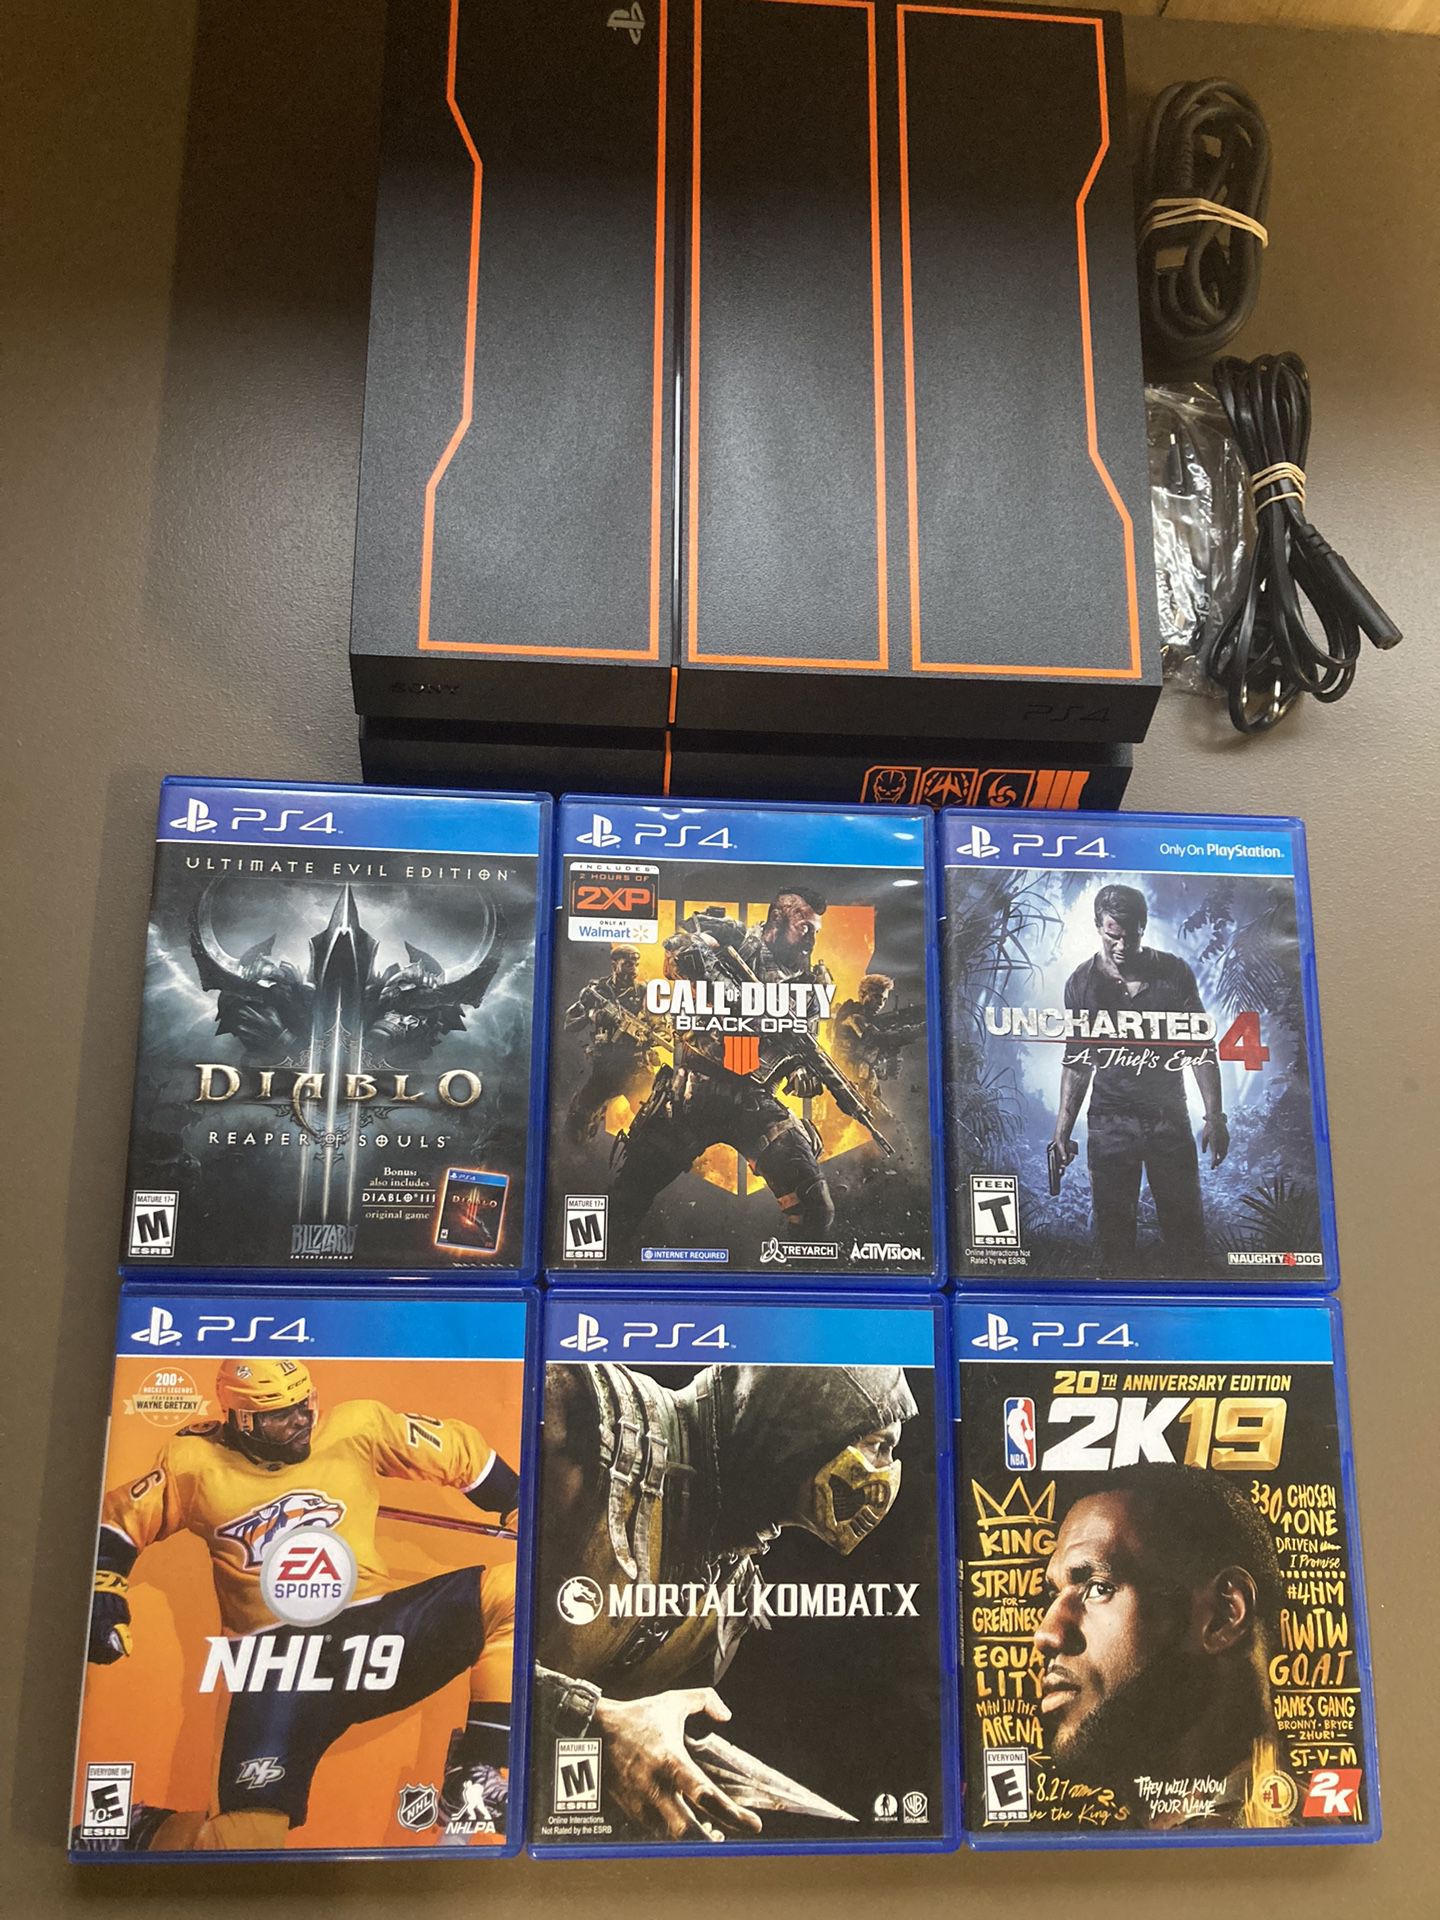 Ps4 Black Ops 3 Edition 1 TB Comes With All The Wires Remote And 6 Cool Adventure Fighting Games Factory Reset Ready To Play In Perfect Condition 